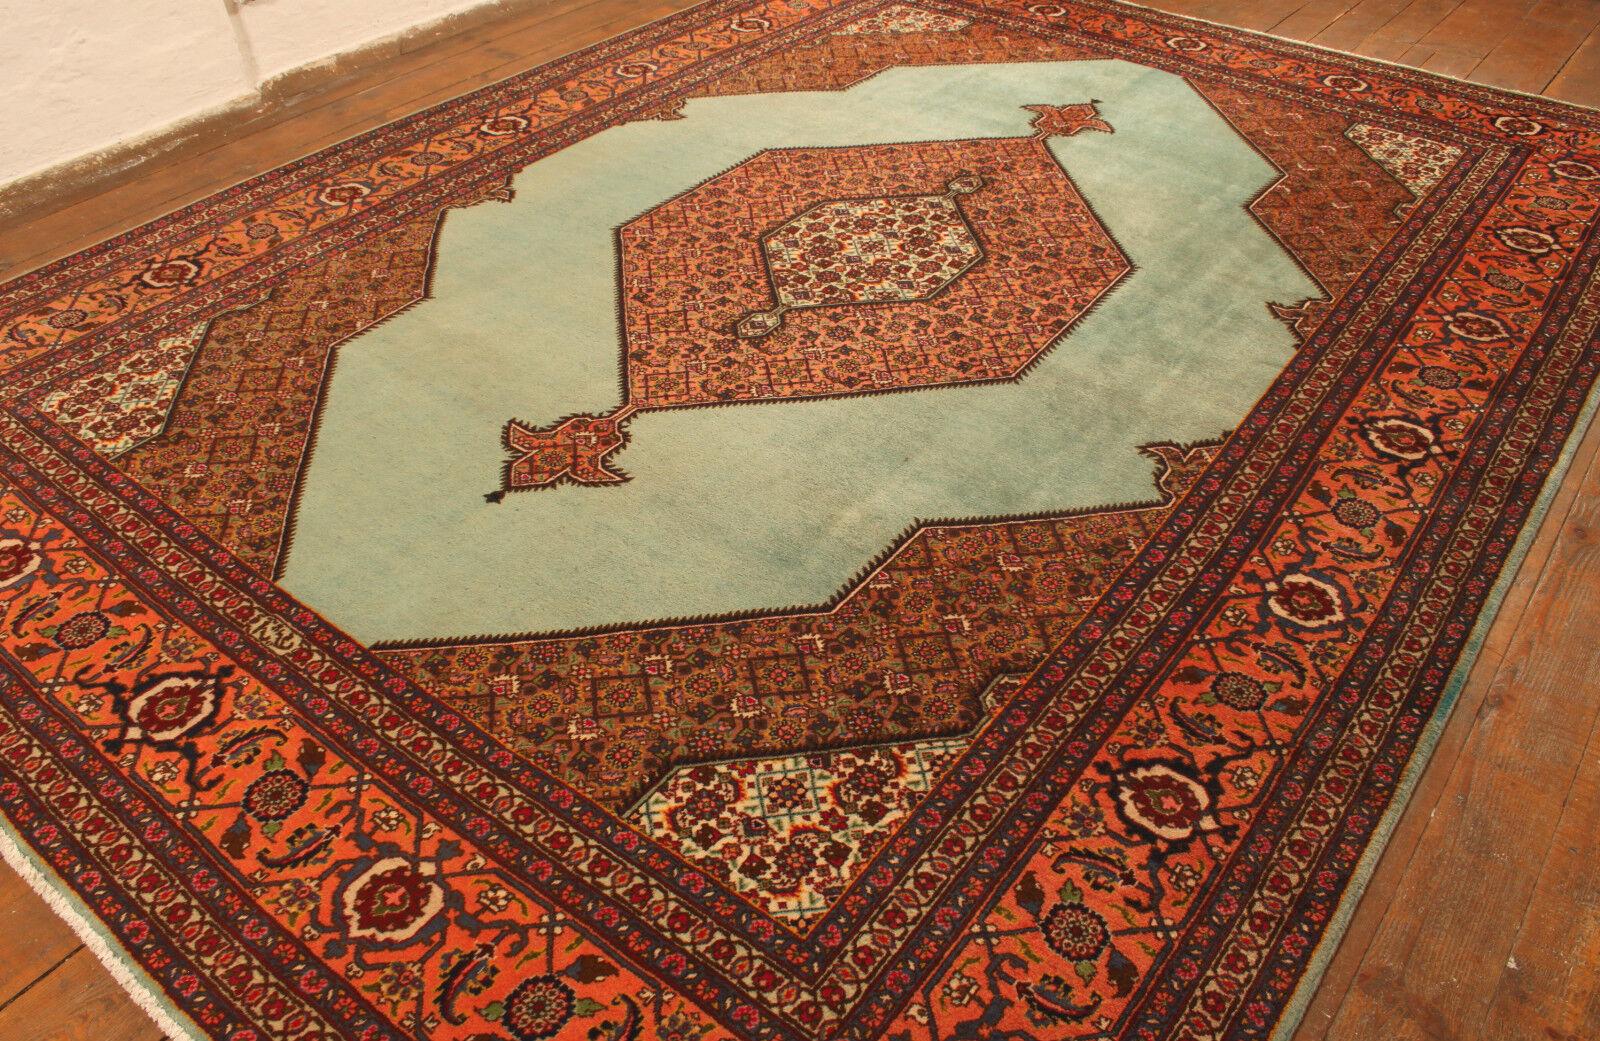 Handmade Vintage Persian Style Tabriz Rug 9.6' x 13.2', 1970s - 1T42 In Good Condition For Sale In Bordeaux, FR